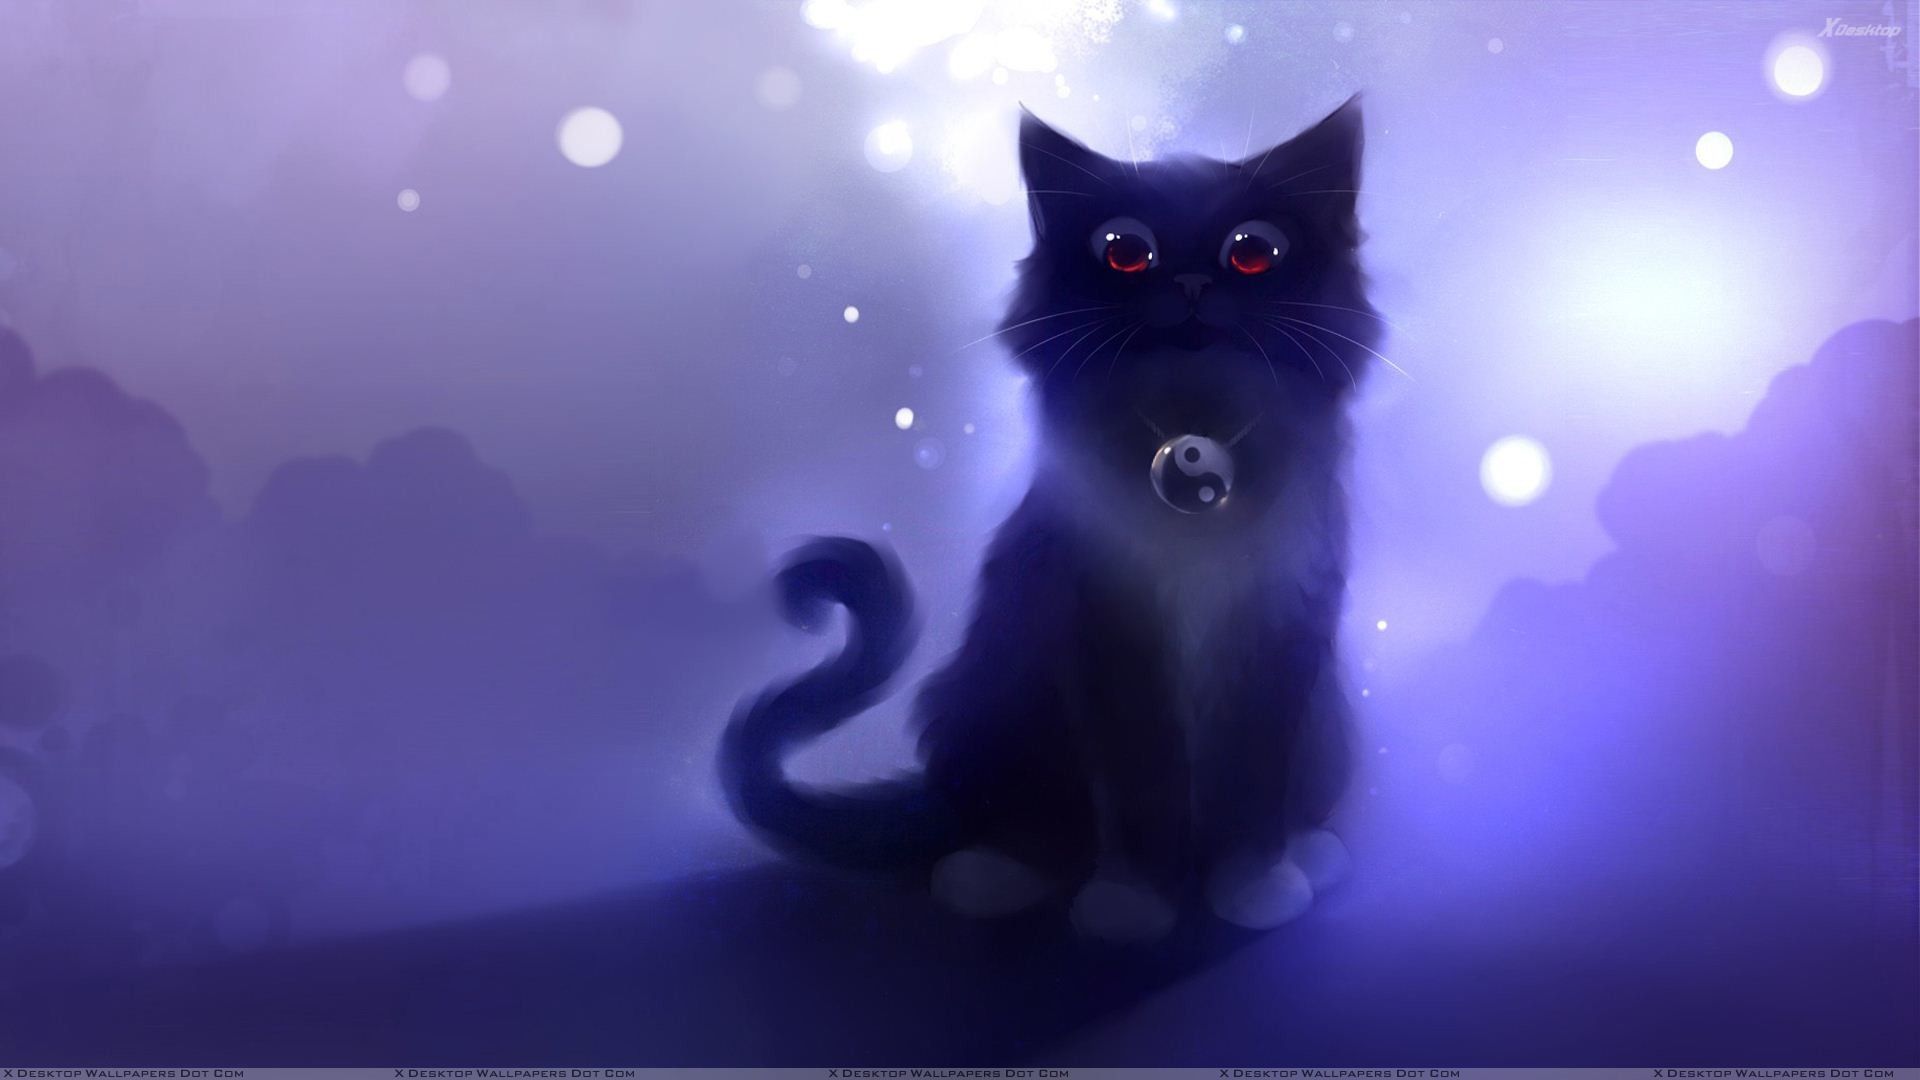 Cute anime girl and flying cat behind blury moon HD wallpaper download